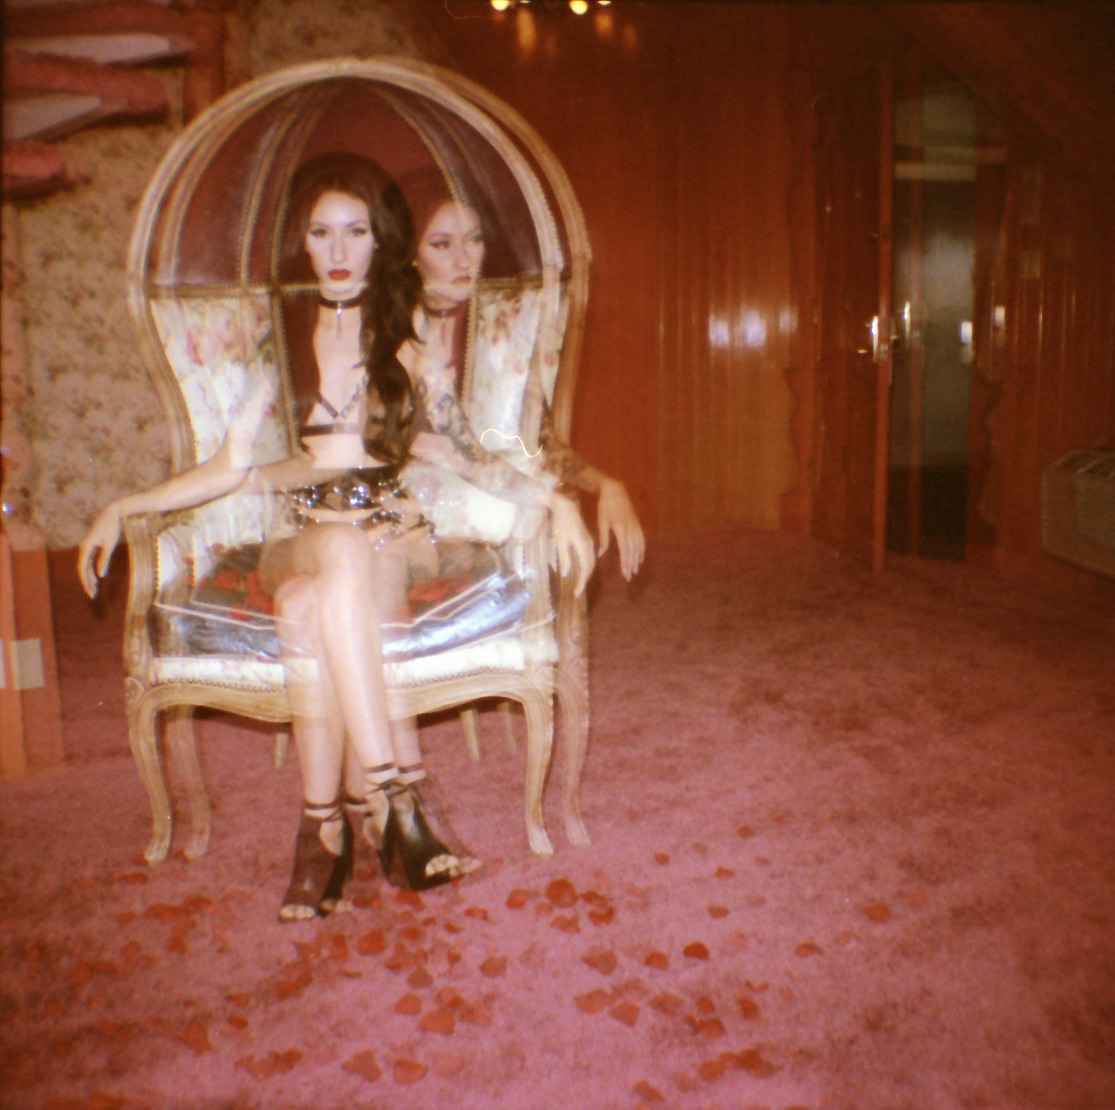 lillipore:  mutedfawn:  so fun to get back a roll of film you’ve been shooting